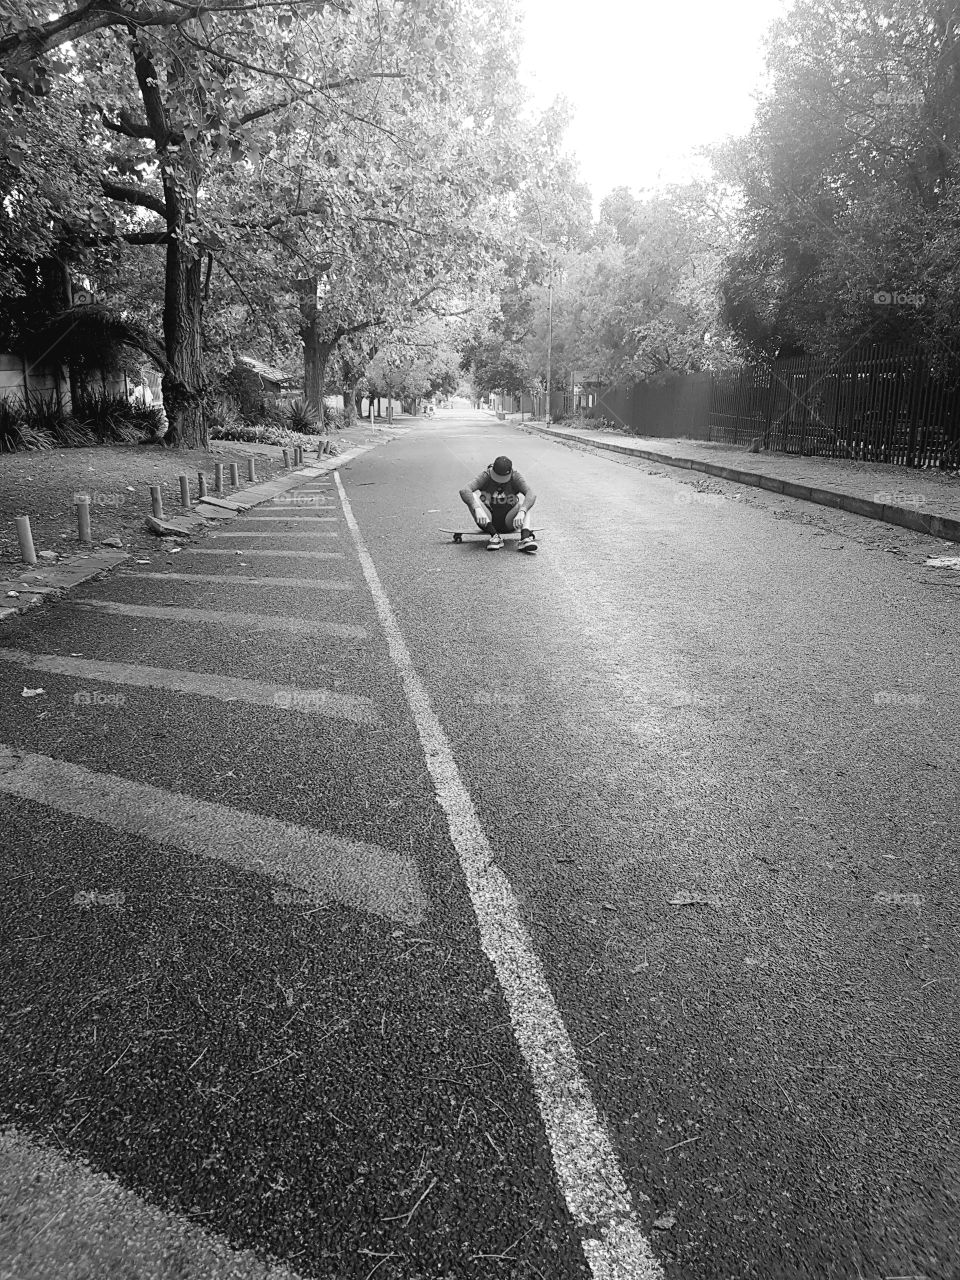 A beautiful picture of a skateboarder sitting in an iconic Jacaranda tree filled street in Johannesburg South Africa. The greyscale, simple yet effective in conveying the emotion this picture is meant to depict.